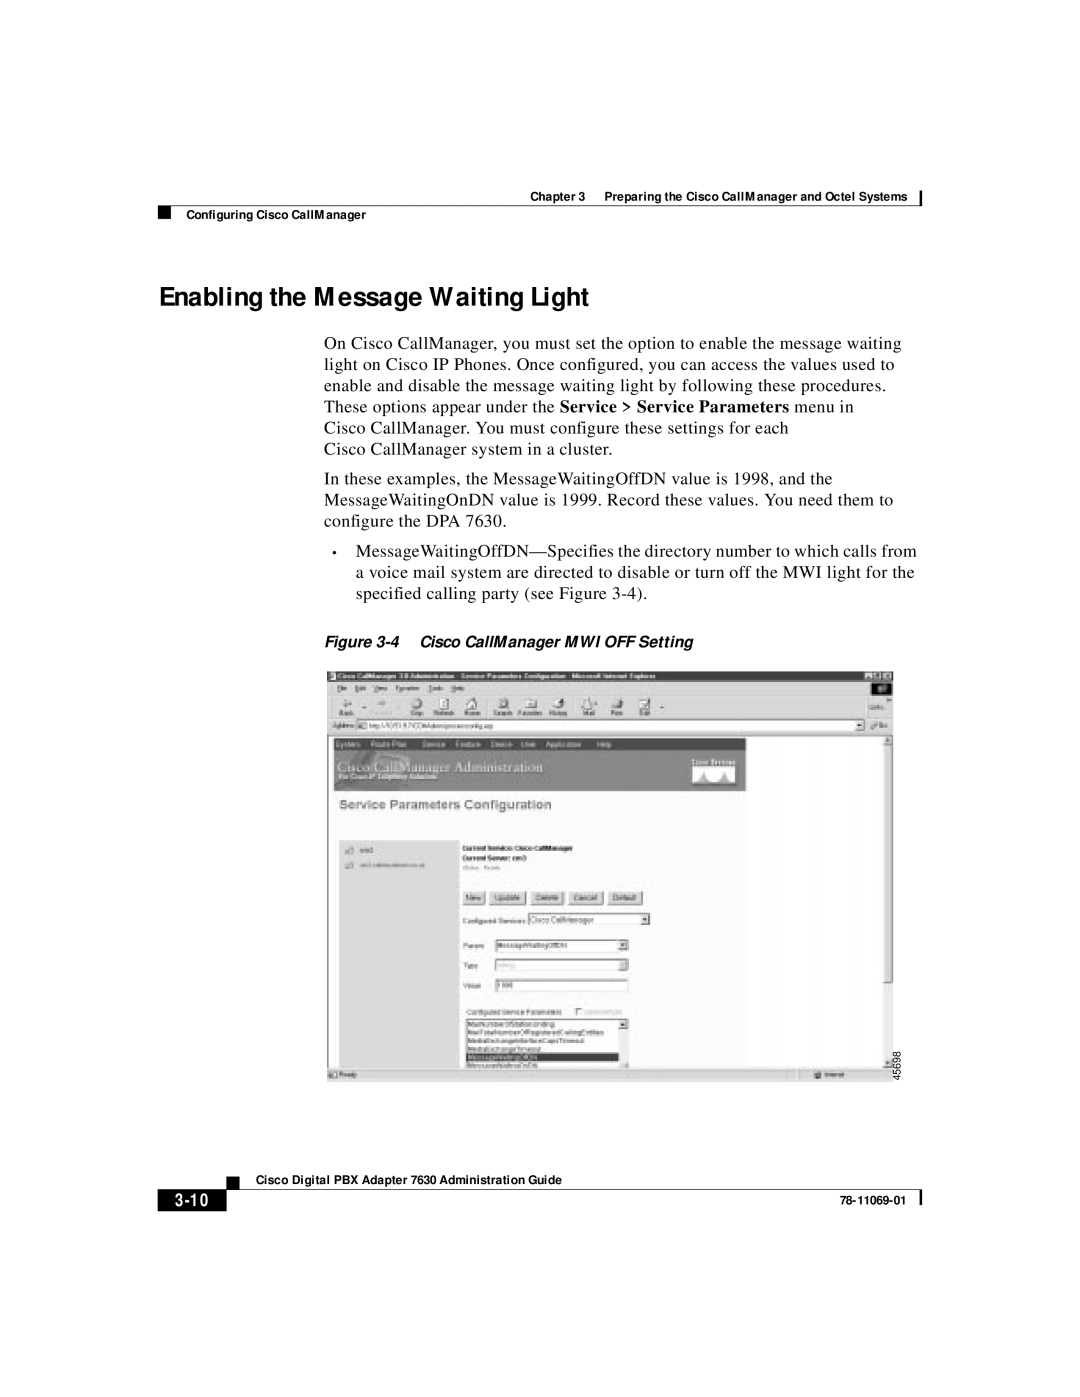 3Com 78-11069-01 manual Enabling the Message Waiting Light, 3-10 